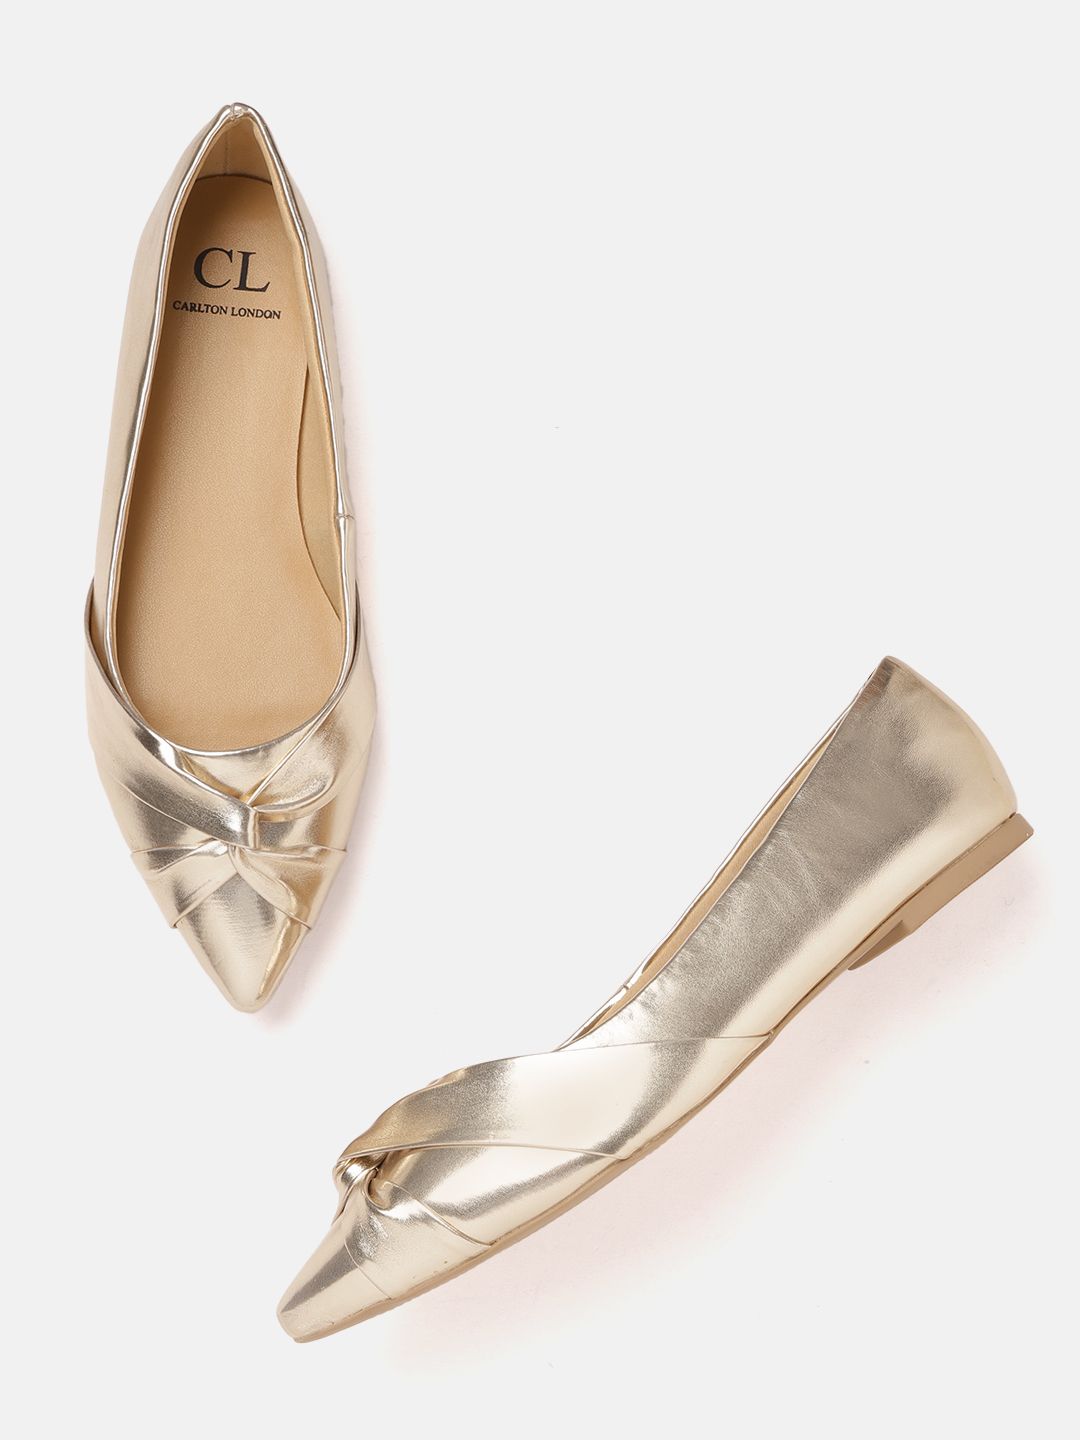 Carlton London Women Gold-Toned Glossy Finish Ballerinas with Knot Detail Price in India